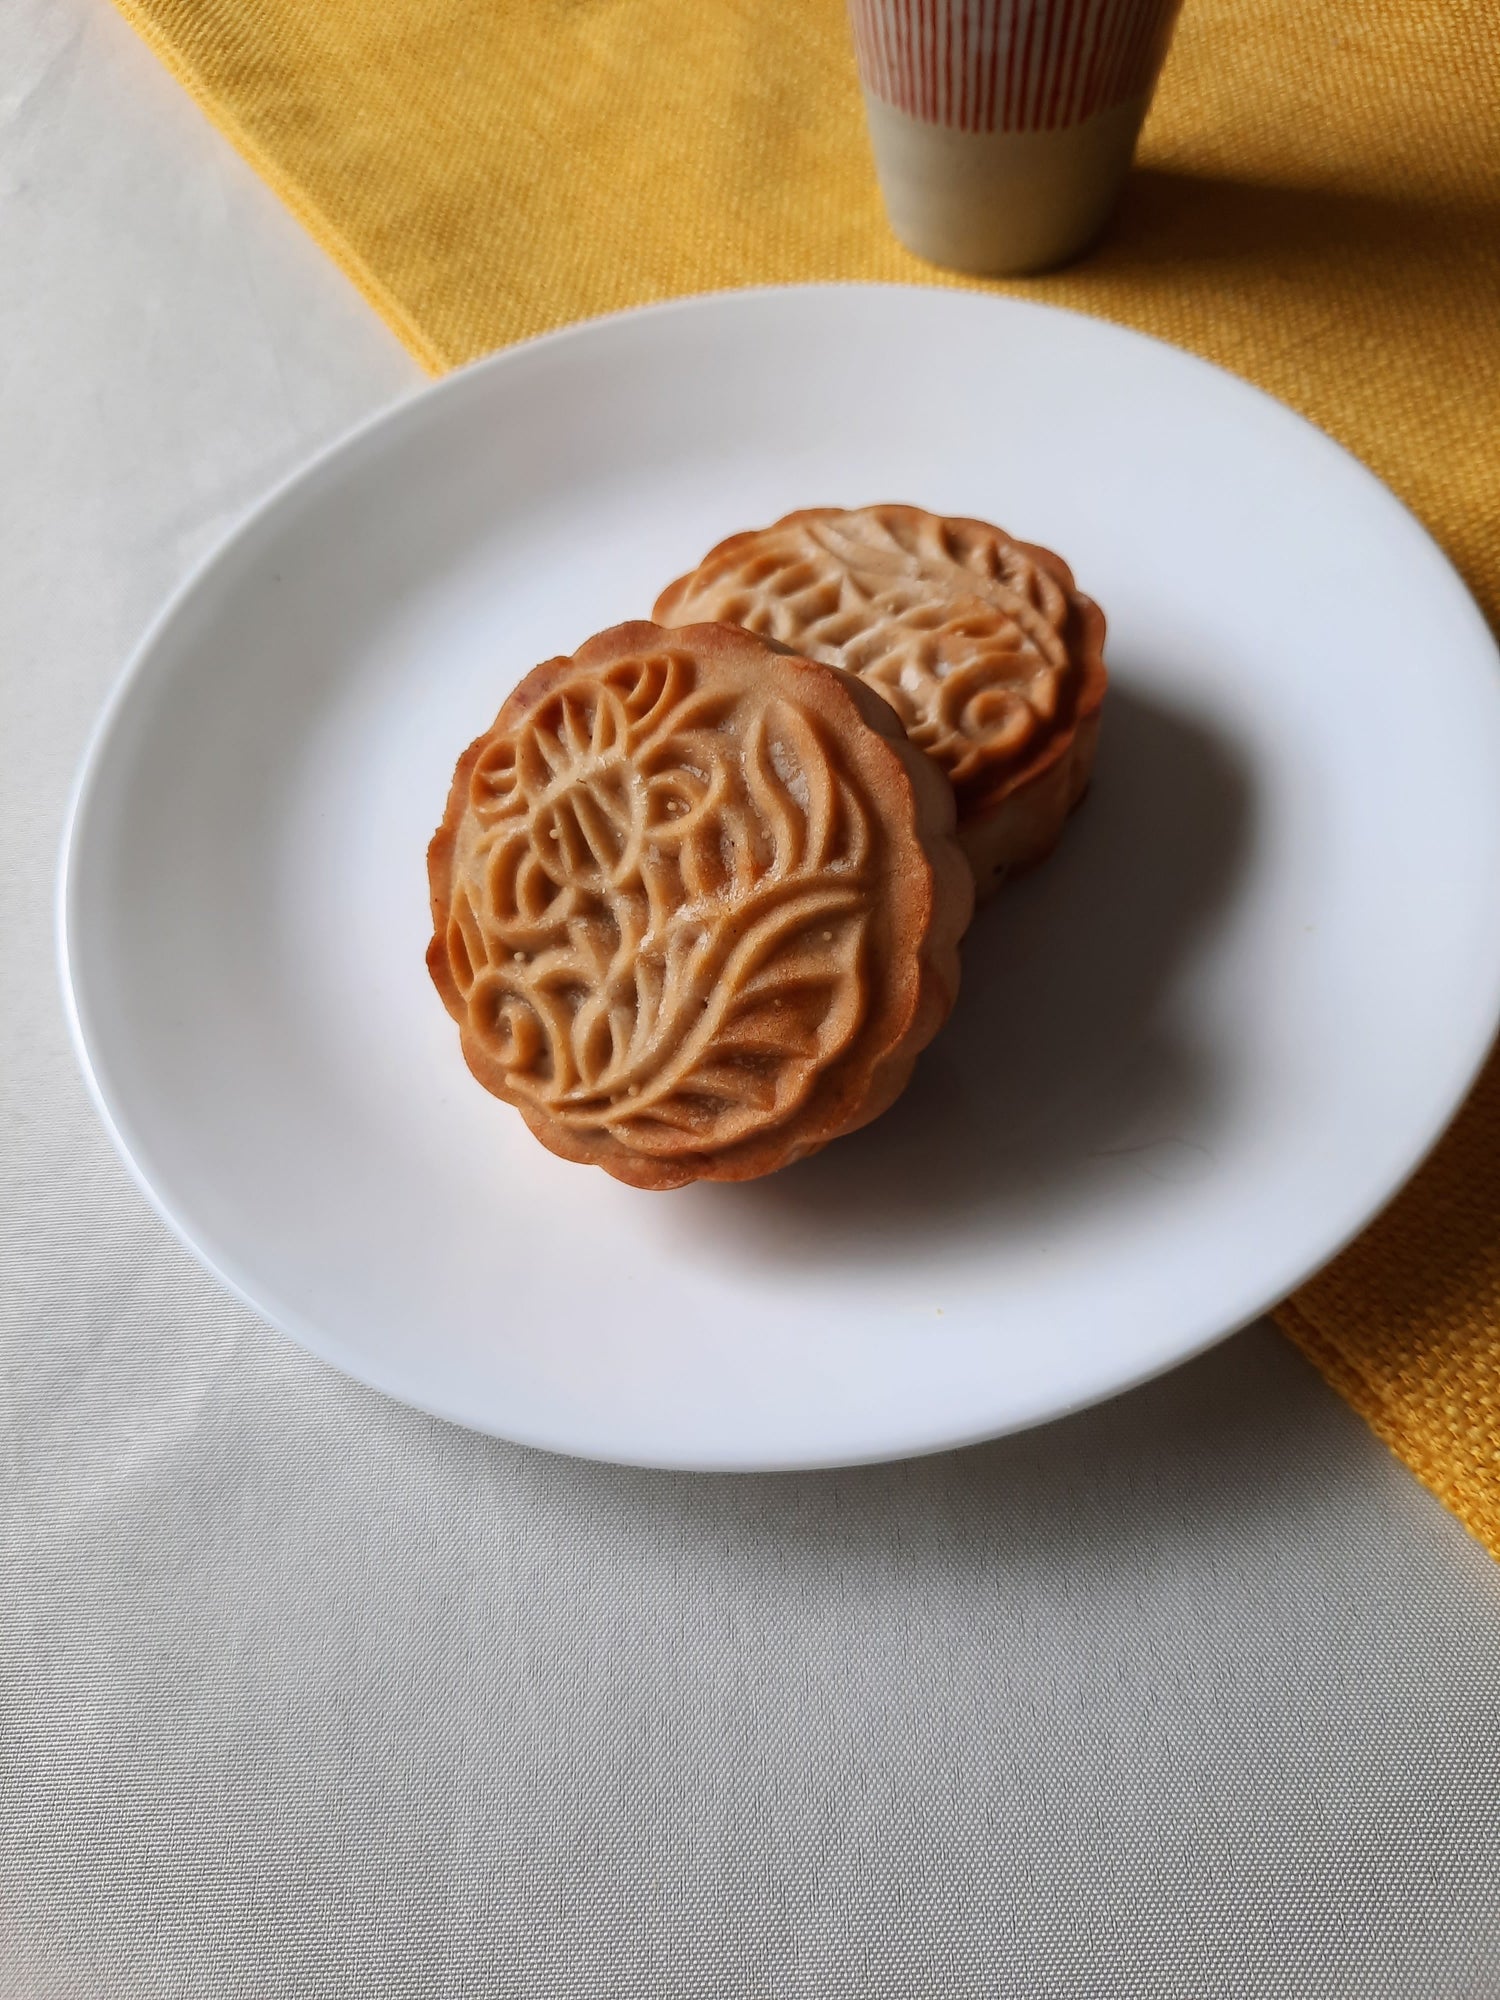 Two full, uncut red bean mooncakes stacked on a white plate.  A cup of green tea in the background.